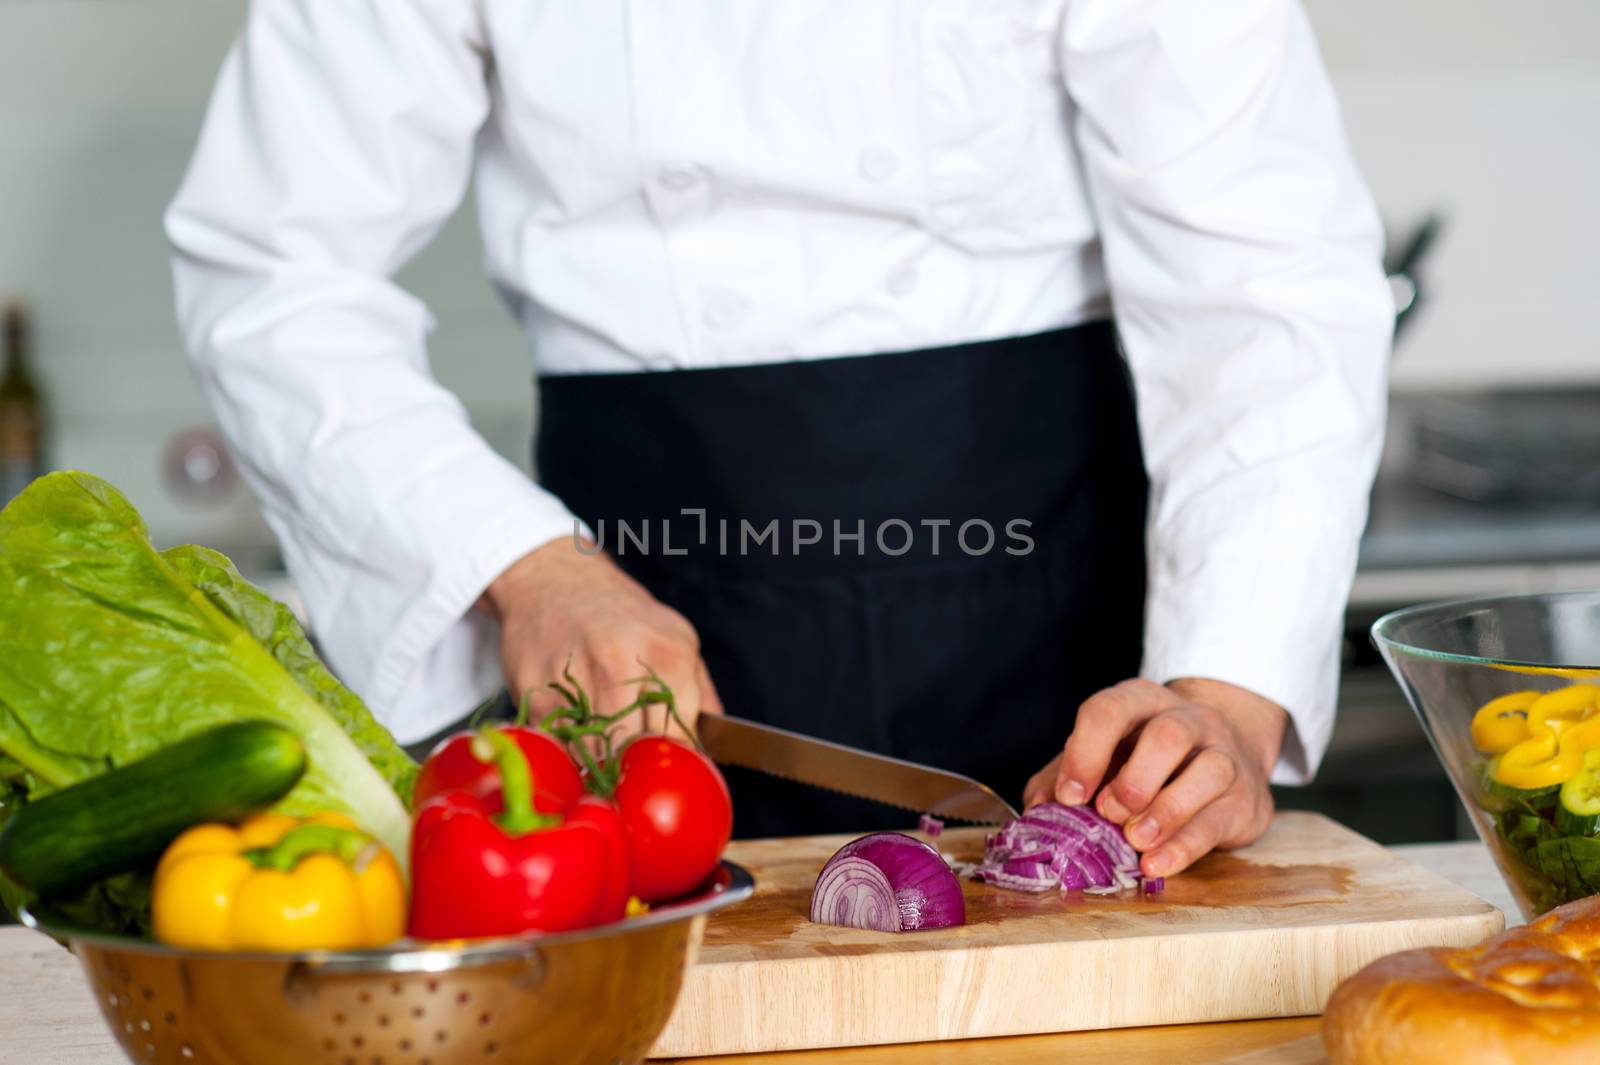 Chef chopping vegetables on a wooden cutting board